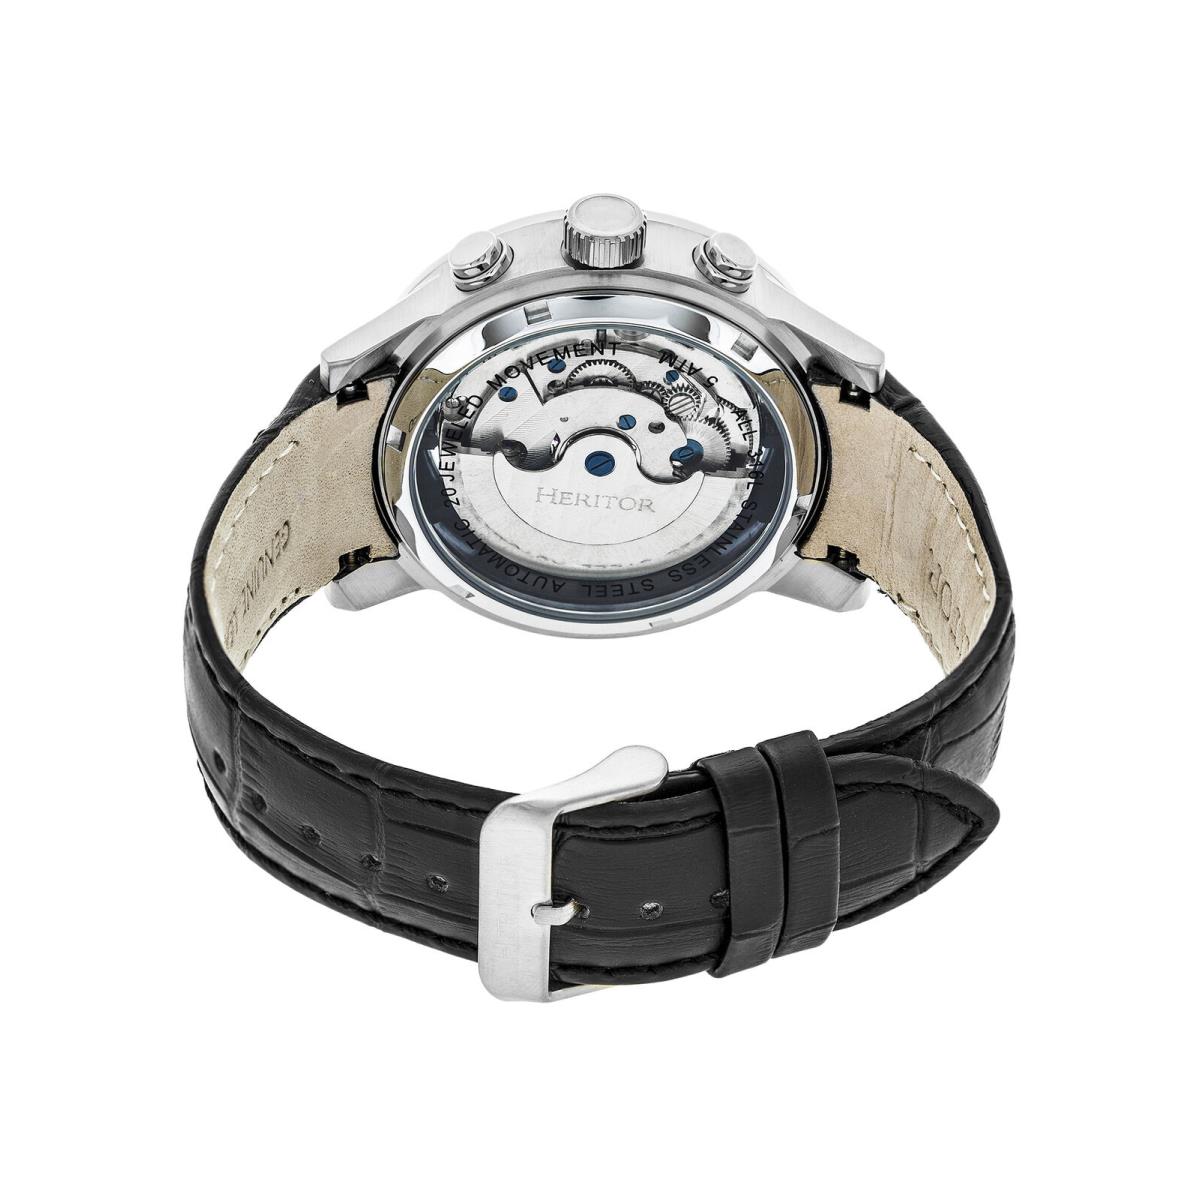 Heritor Automatic Hannibal Semi-skeleton Leather-band Watch - Silver - Silver Dial, Black Band